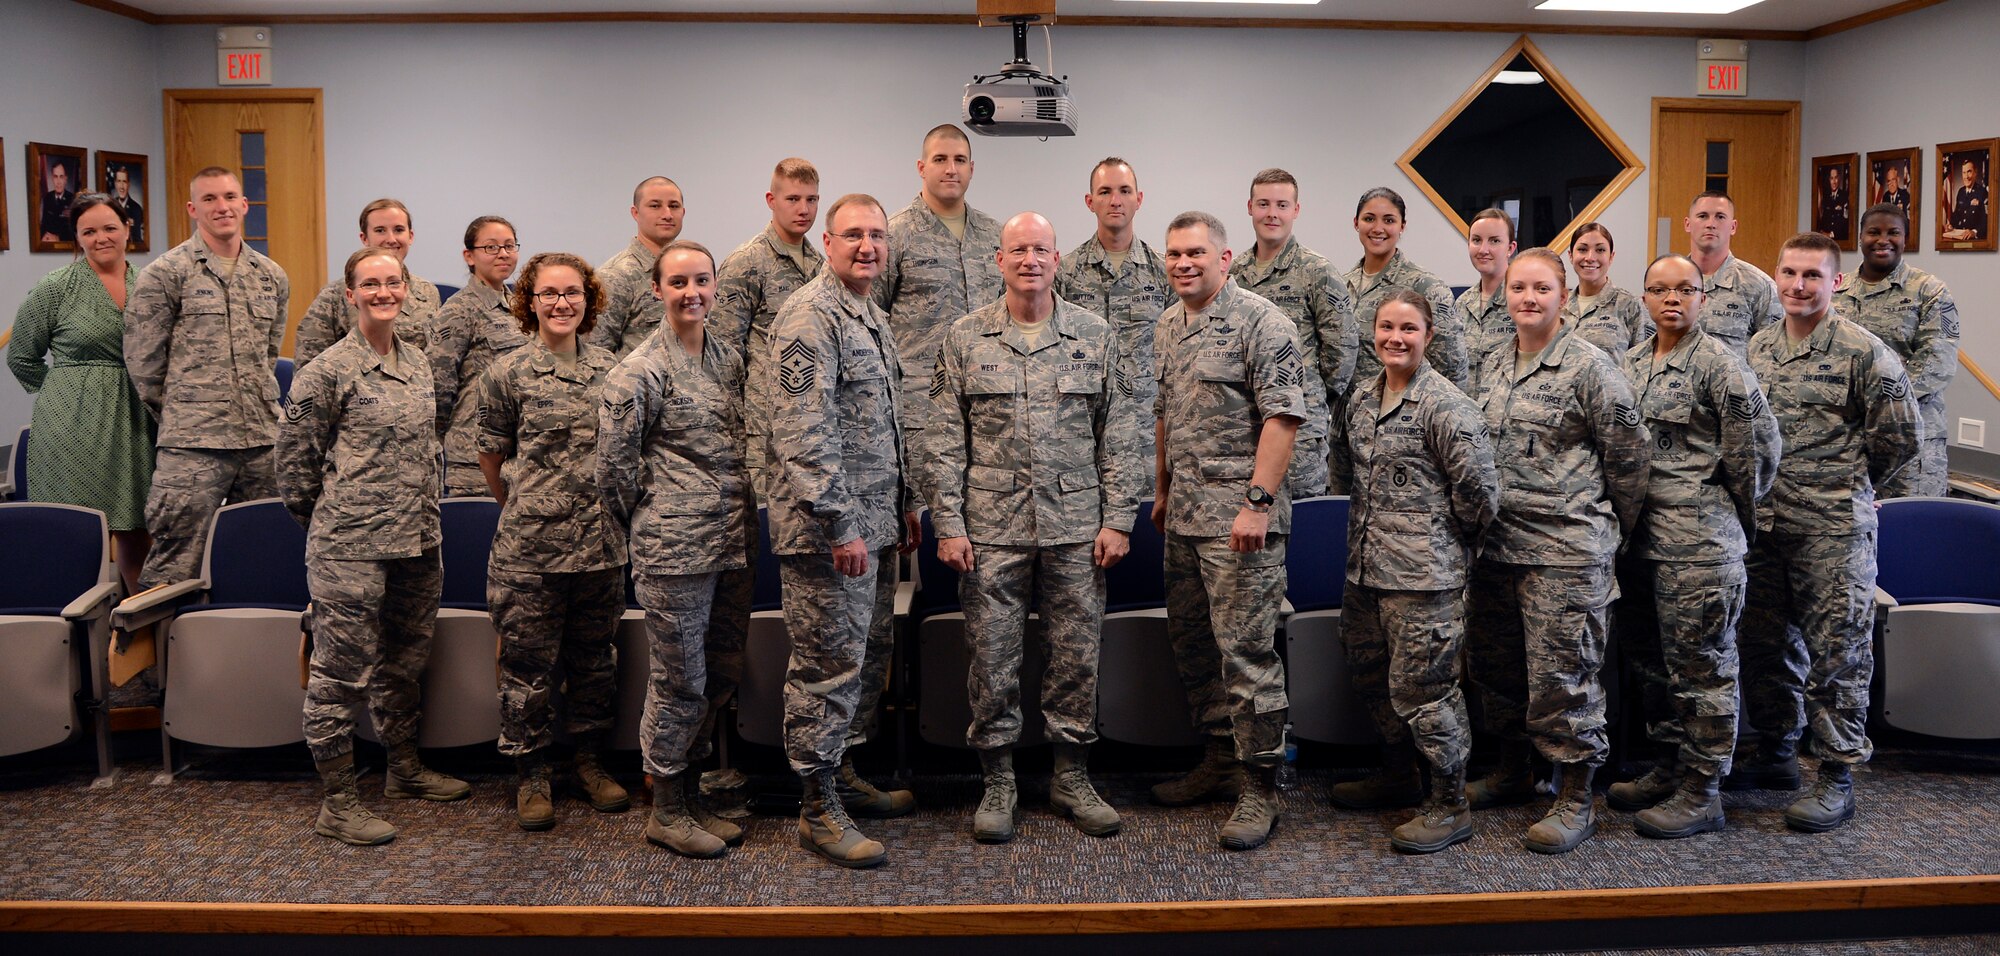 Airmen from the recent Resiliency Tiger Team pose with, left to right, Command Chief Master Sgts. Marty Anderson, 8th Air Force; Terry West, Air Force Global Strike Command and Tommy Mazzone, 2nd Bomb Wing, on Barksdale Air Force Base, La., April 1, 2015. Around 20 Airmen were selected from AFGSC, numbered air forces and wings to voice ideas on combatting real life issues with realistic resiliency techniques. (U.S. Air Force photo/Senior Airman Joseph A. Pagán Jr.)